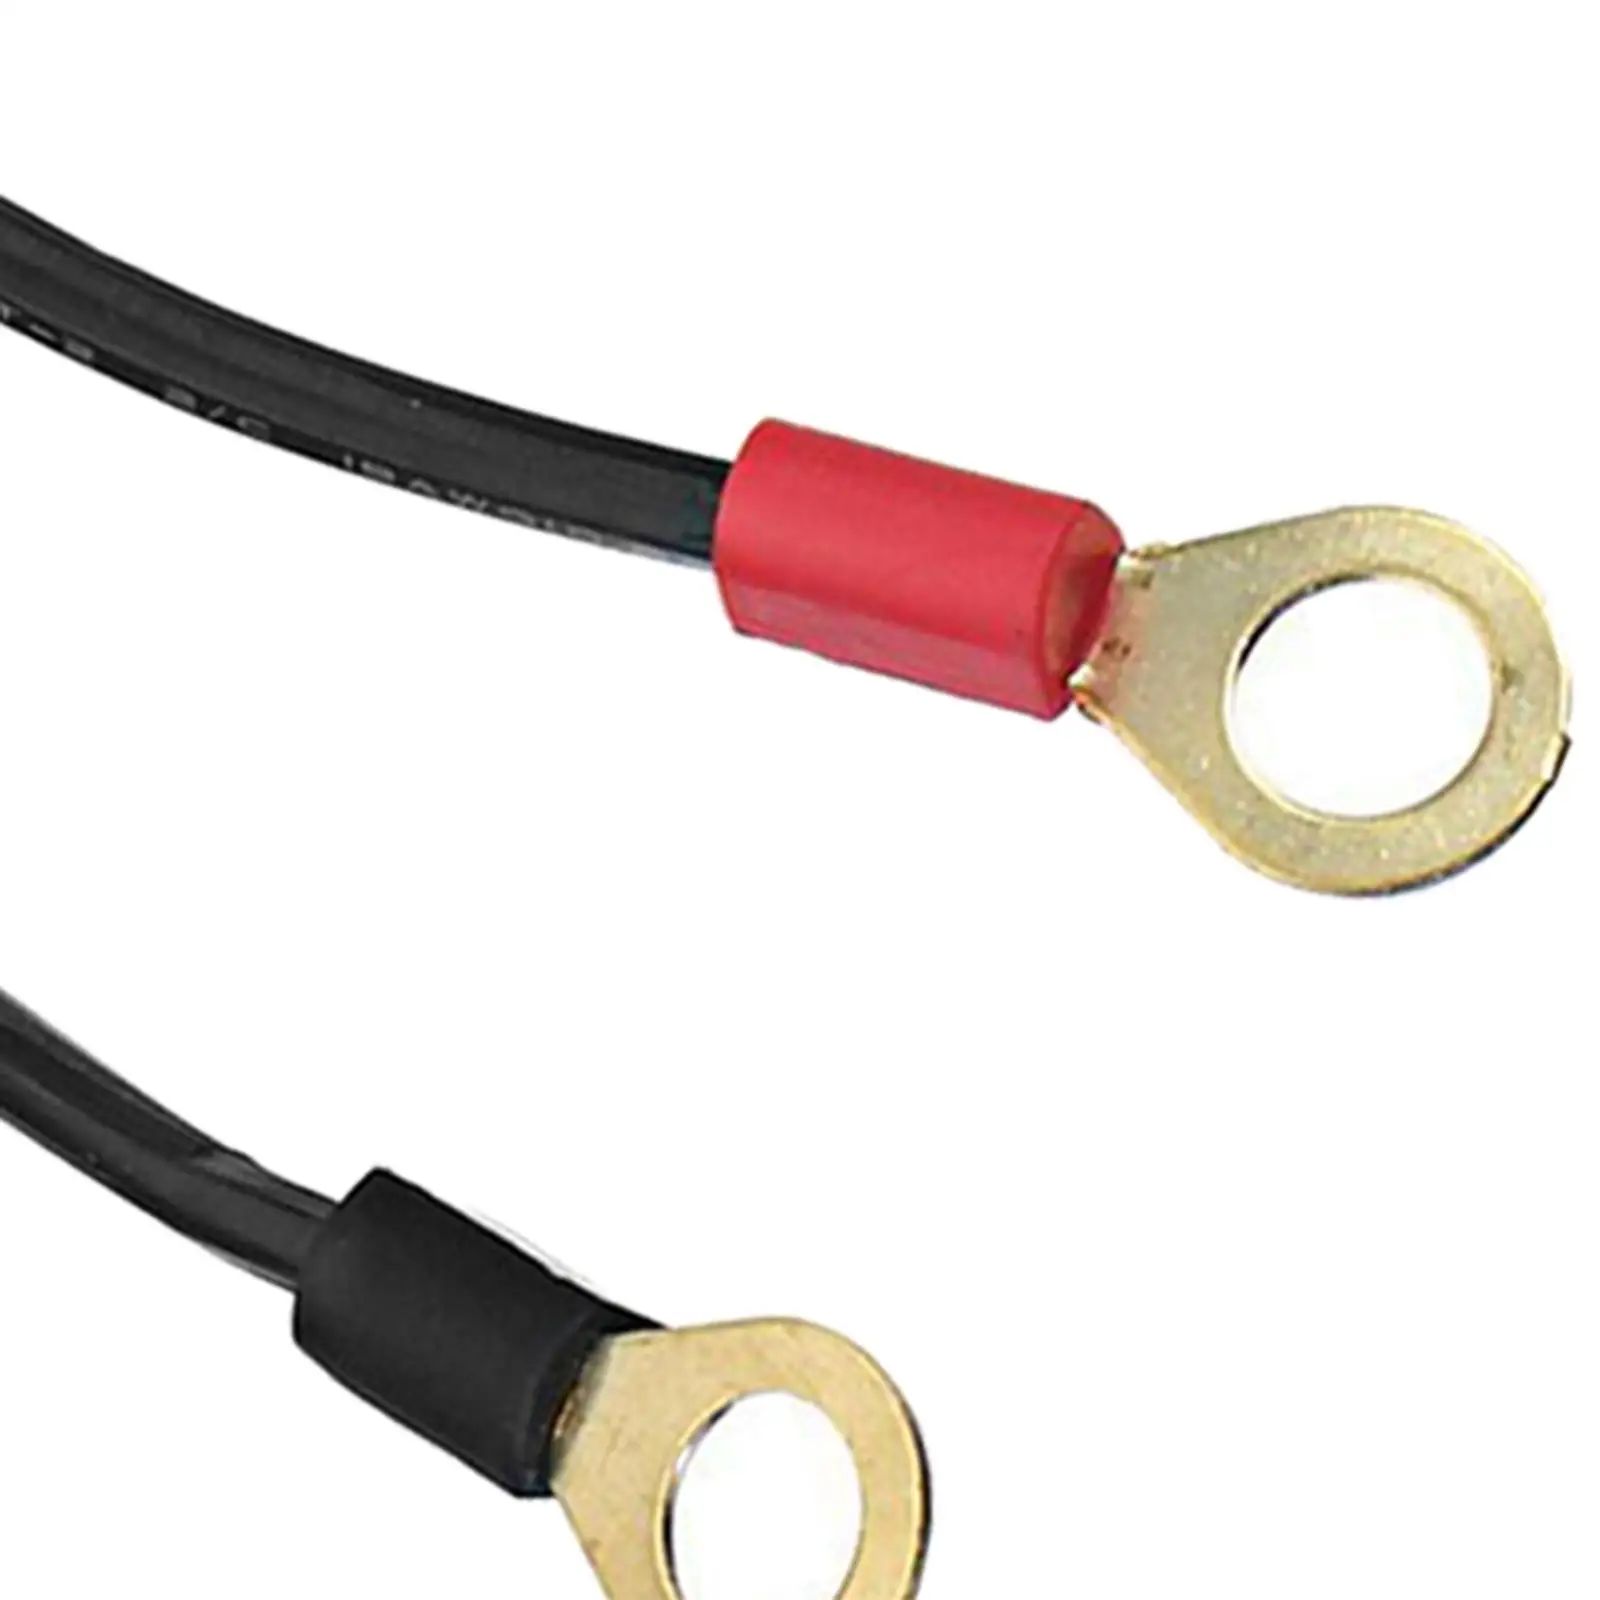 SAE Quick Disconnect Cable Fit for Motorcycle Battery Terminal Tractor Car